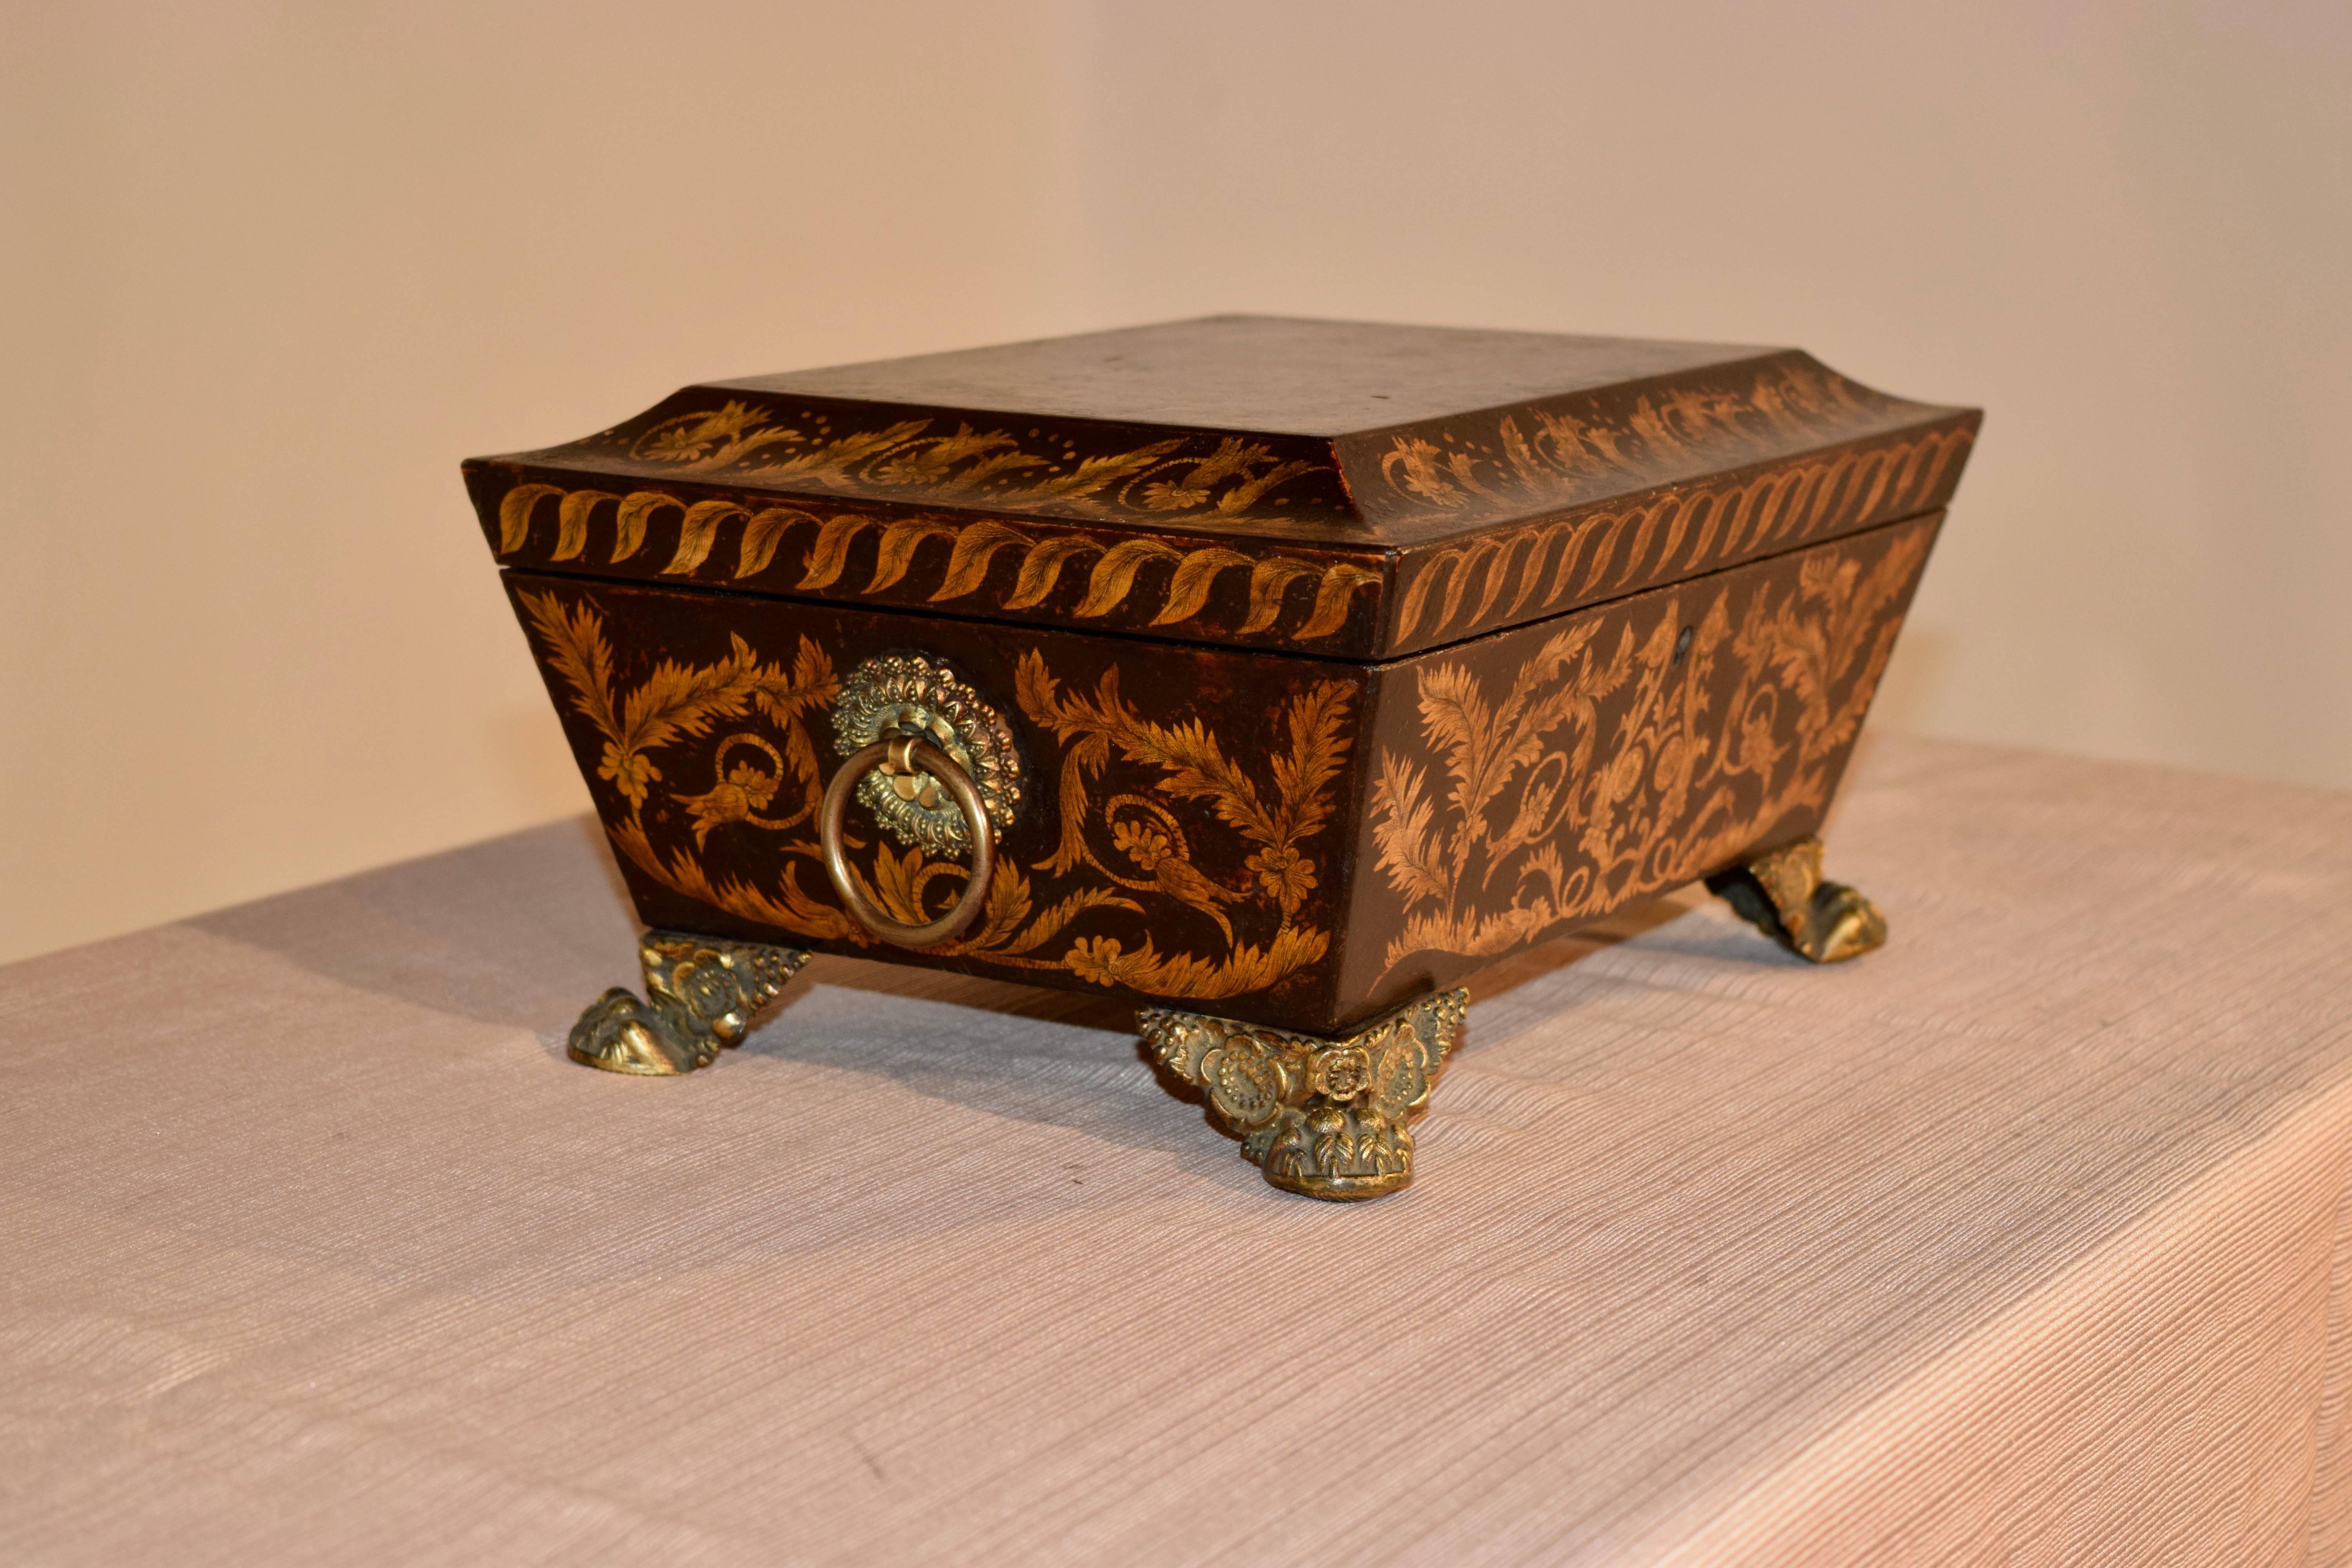 Early 19th century dresser box made of leather with hand stenciled decoration. The sides have applied pulls, which are wonderfully hand casted brass. The feet appear to be original and are hand cast brass paws with floral decoration. The box opens